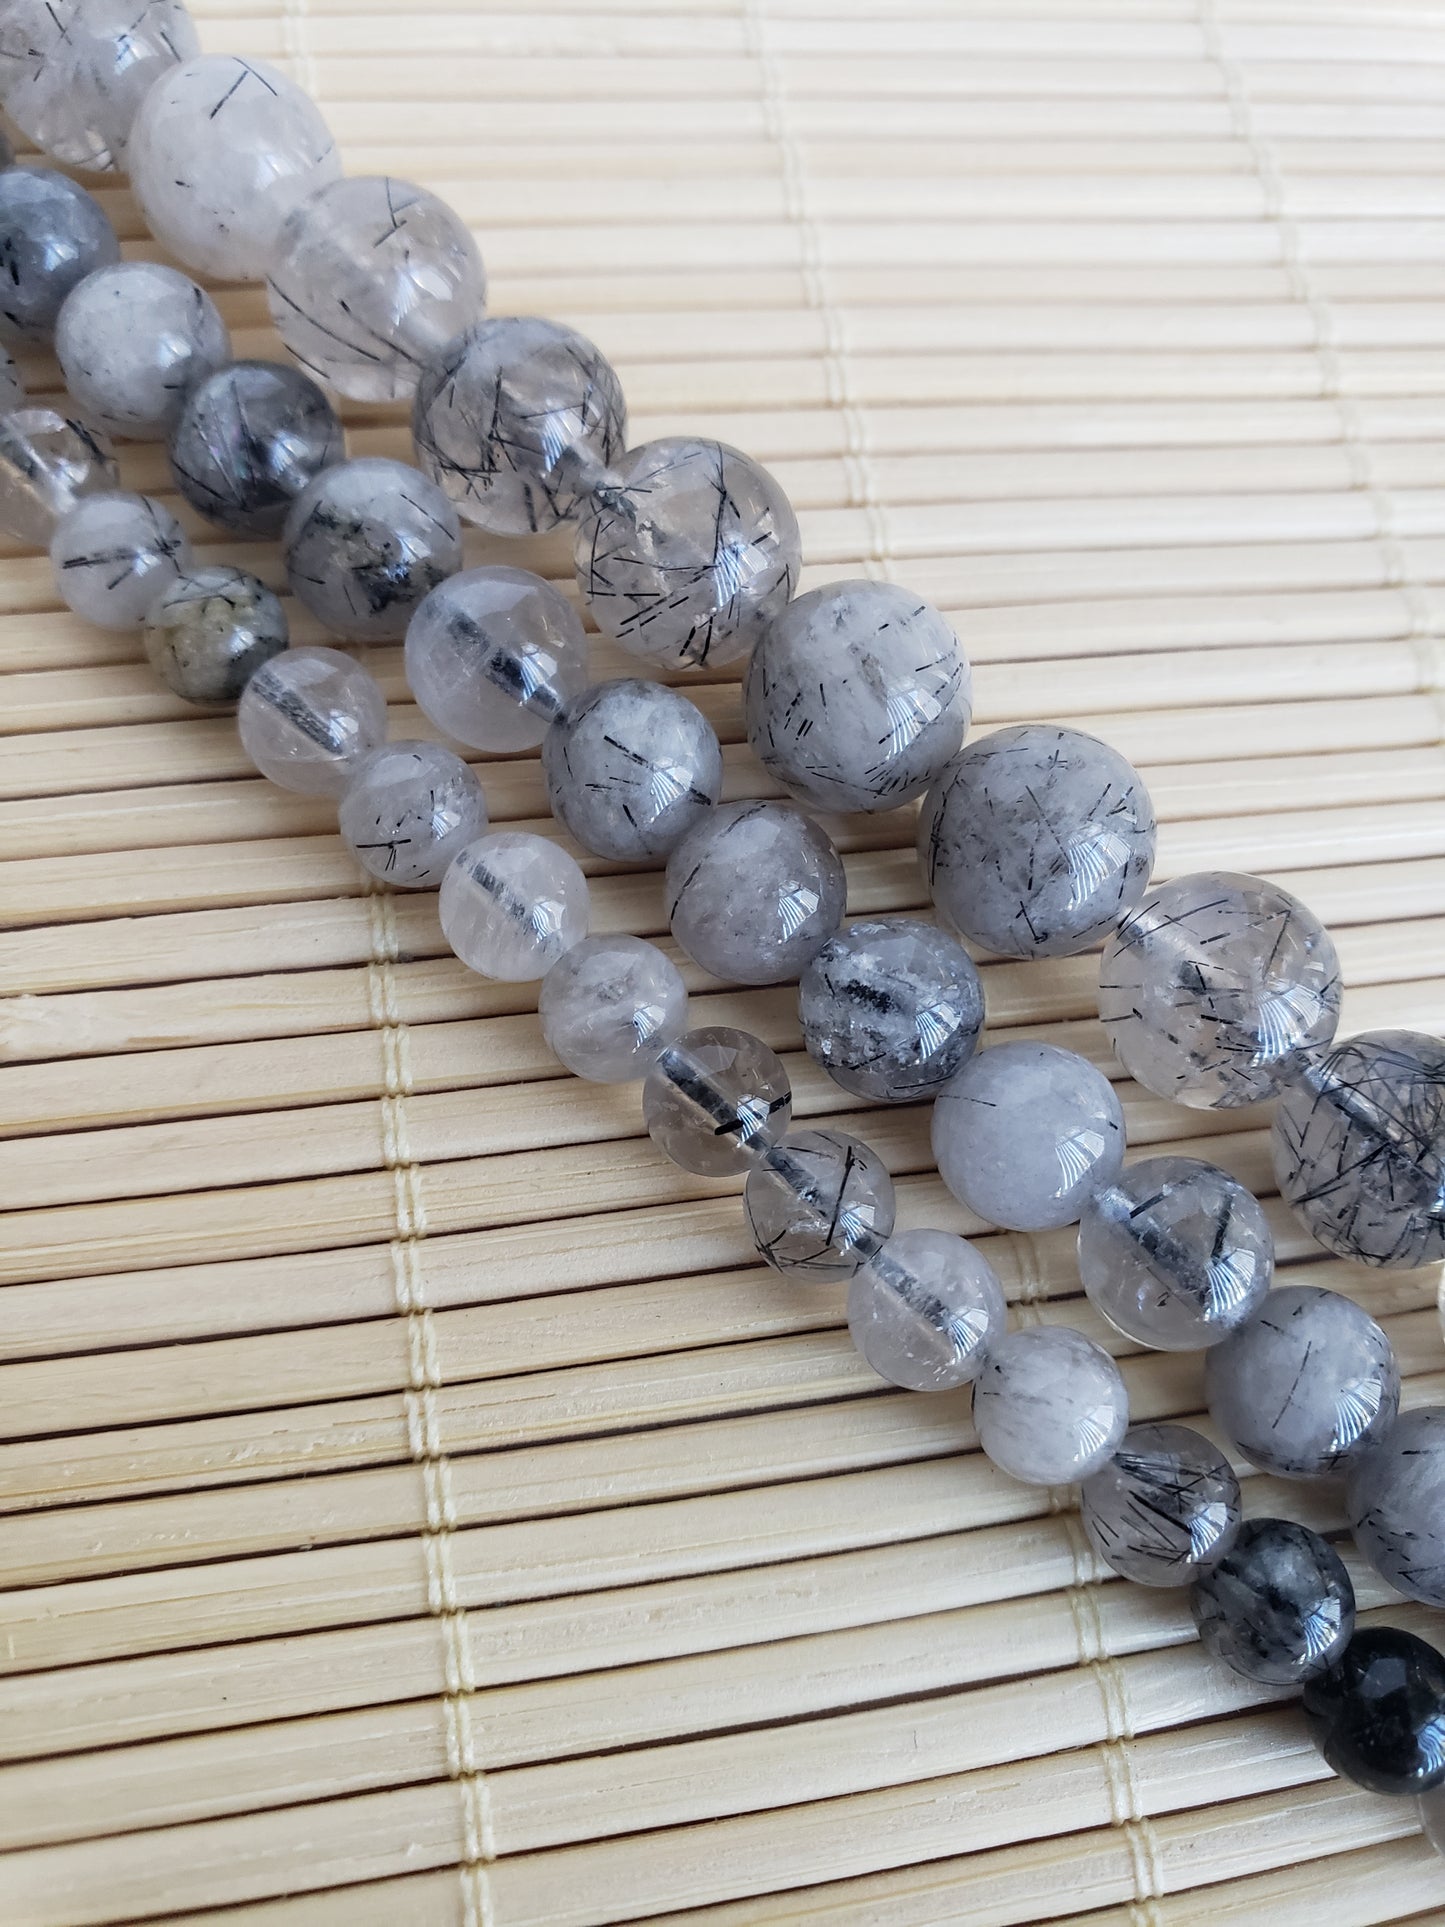 Crafting supplies such as black rutilated quartz beads available at wholesale and retail prices, only at our crystal shop in San Diego!